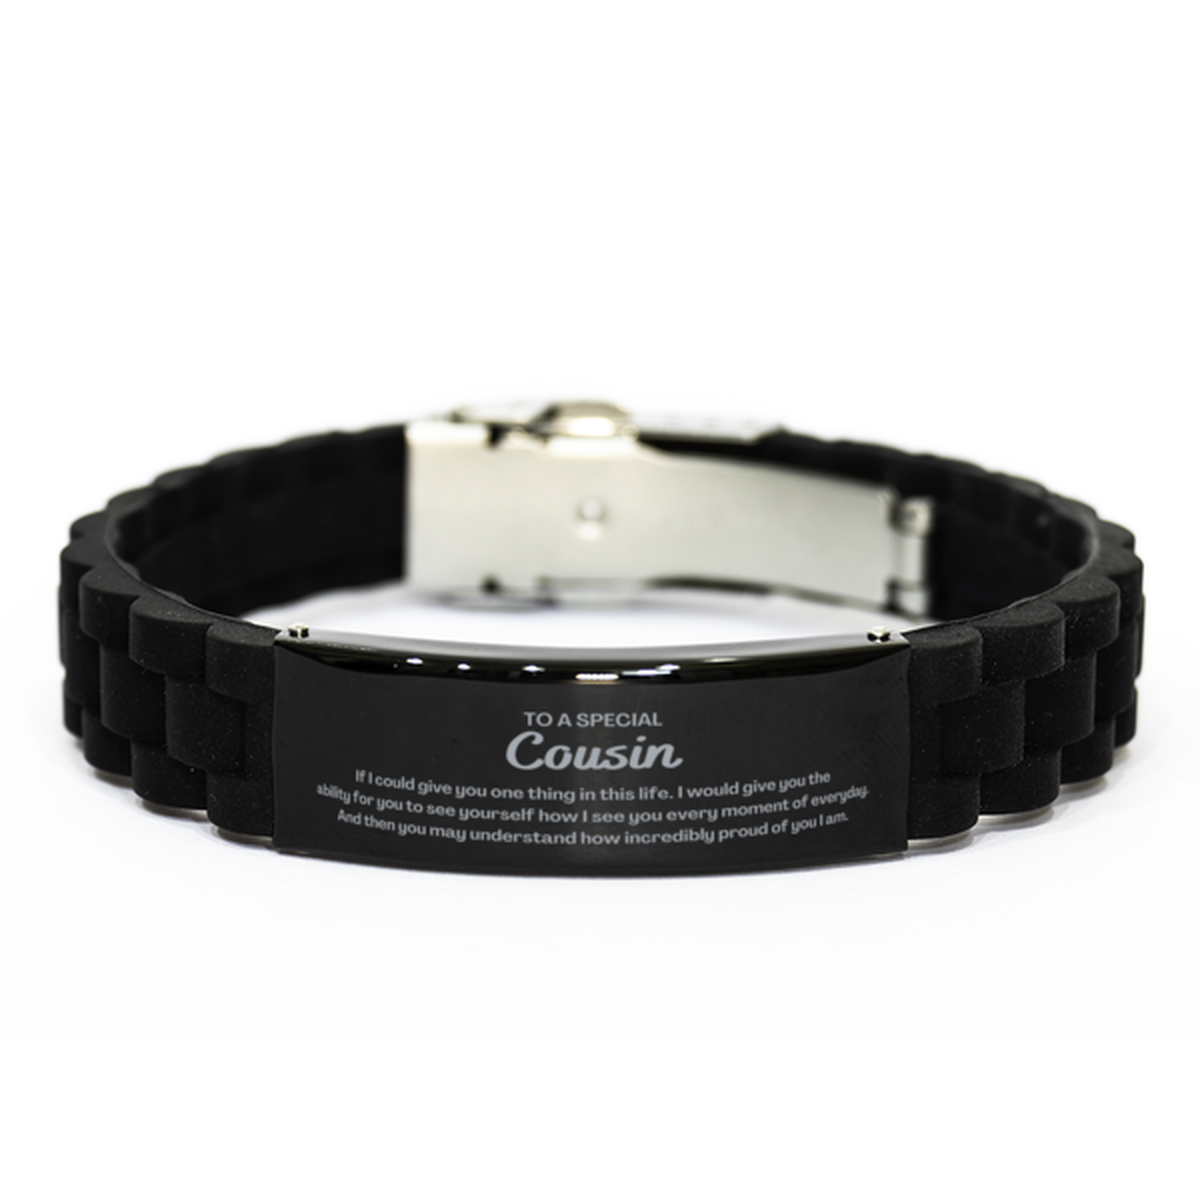 To My Cousin Black Glidelock Clasp Bracelet, Gifts For Cousin Engraved, Inspirational Gifts for Christmas Birthday, Epic Gifts for Cousin To A Special Cousin how incredibly proud of you I am